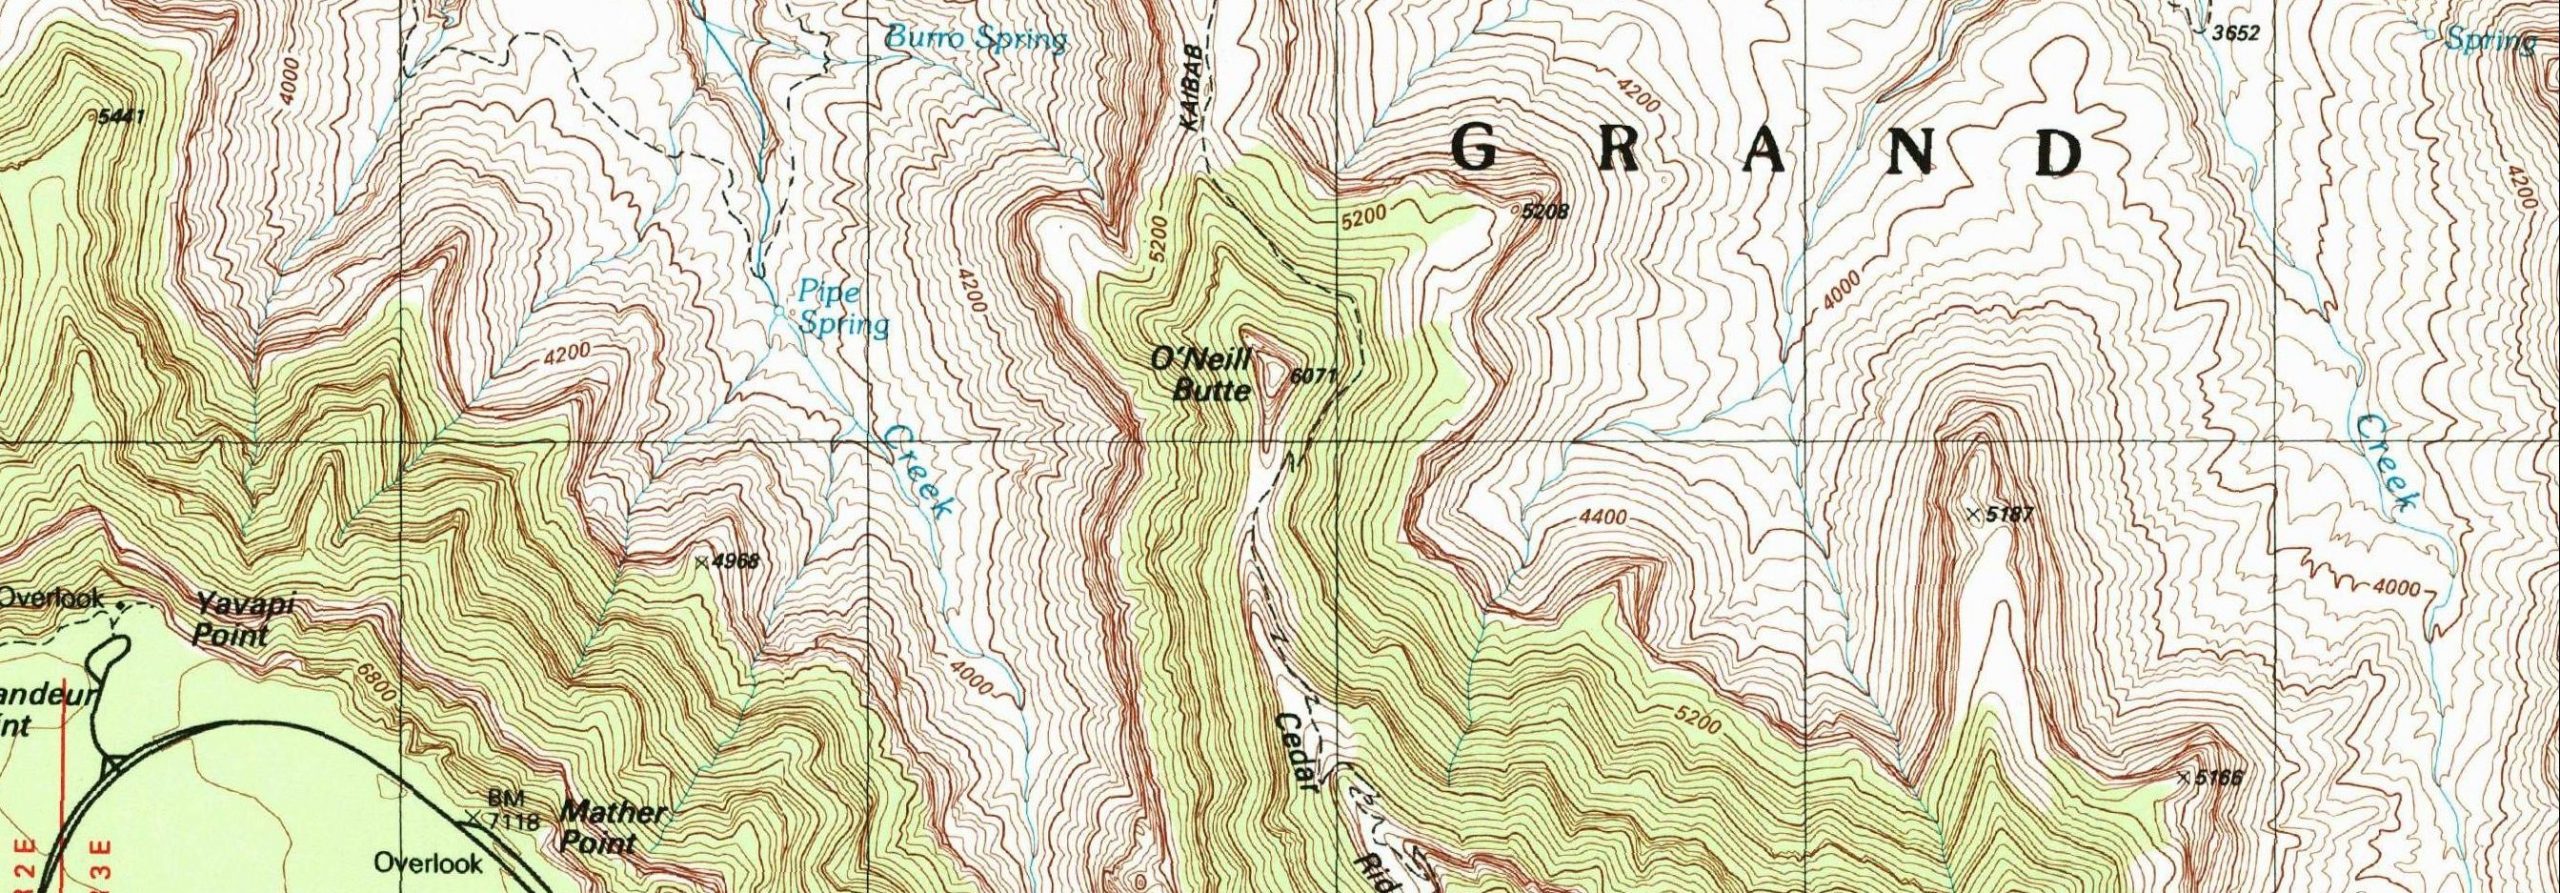 A section of a USGS topographic quadrangle map from the Grand Canyon